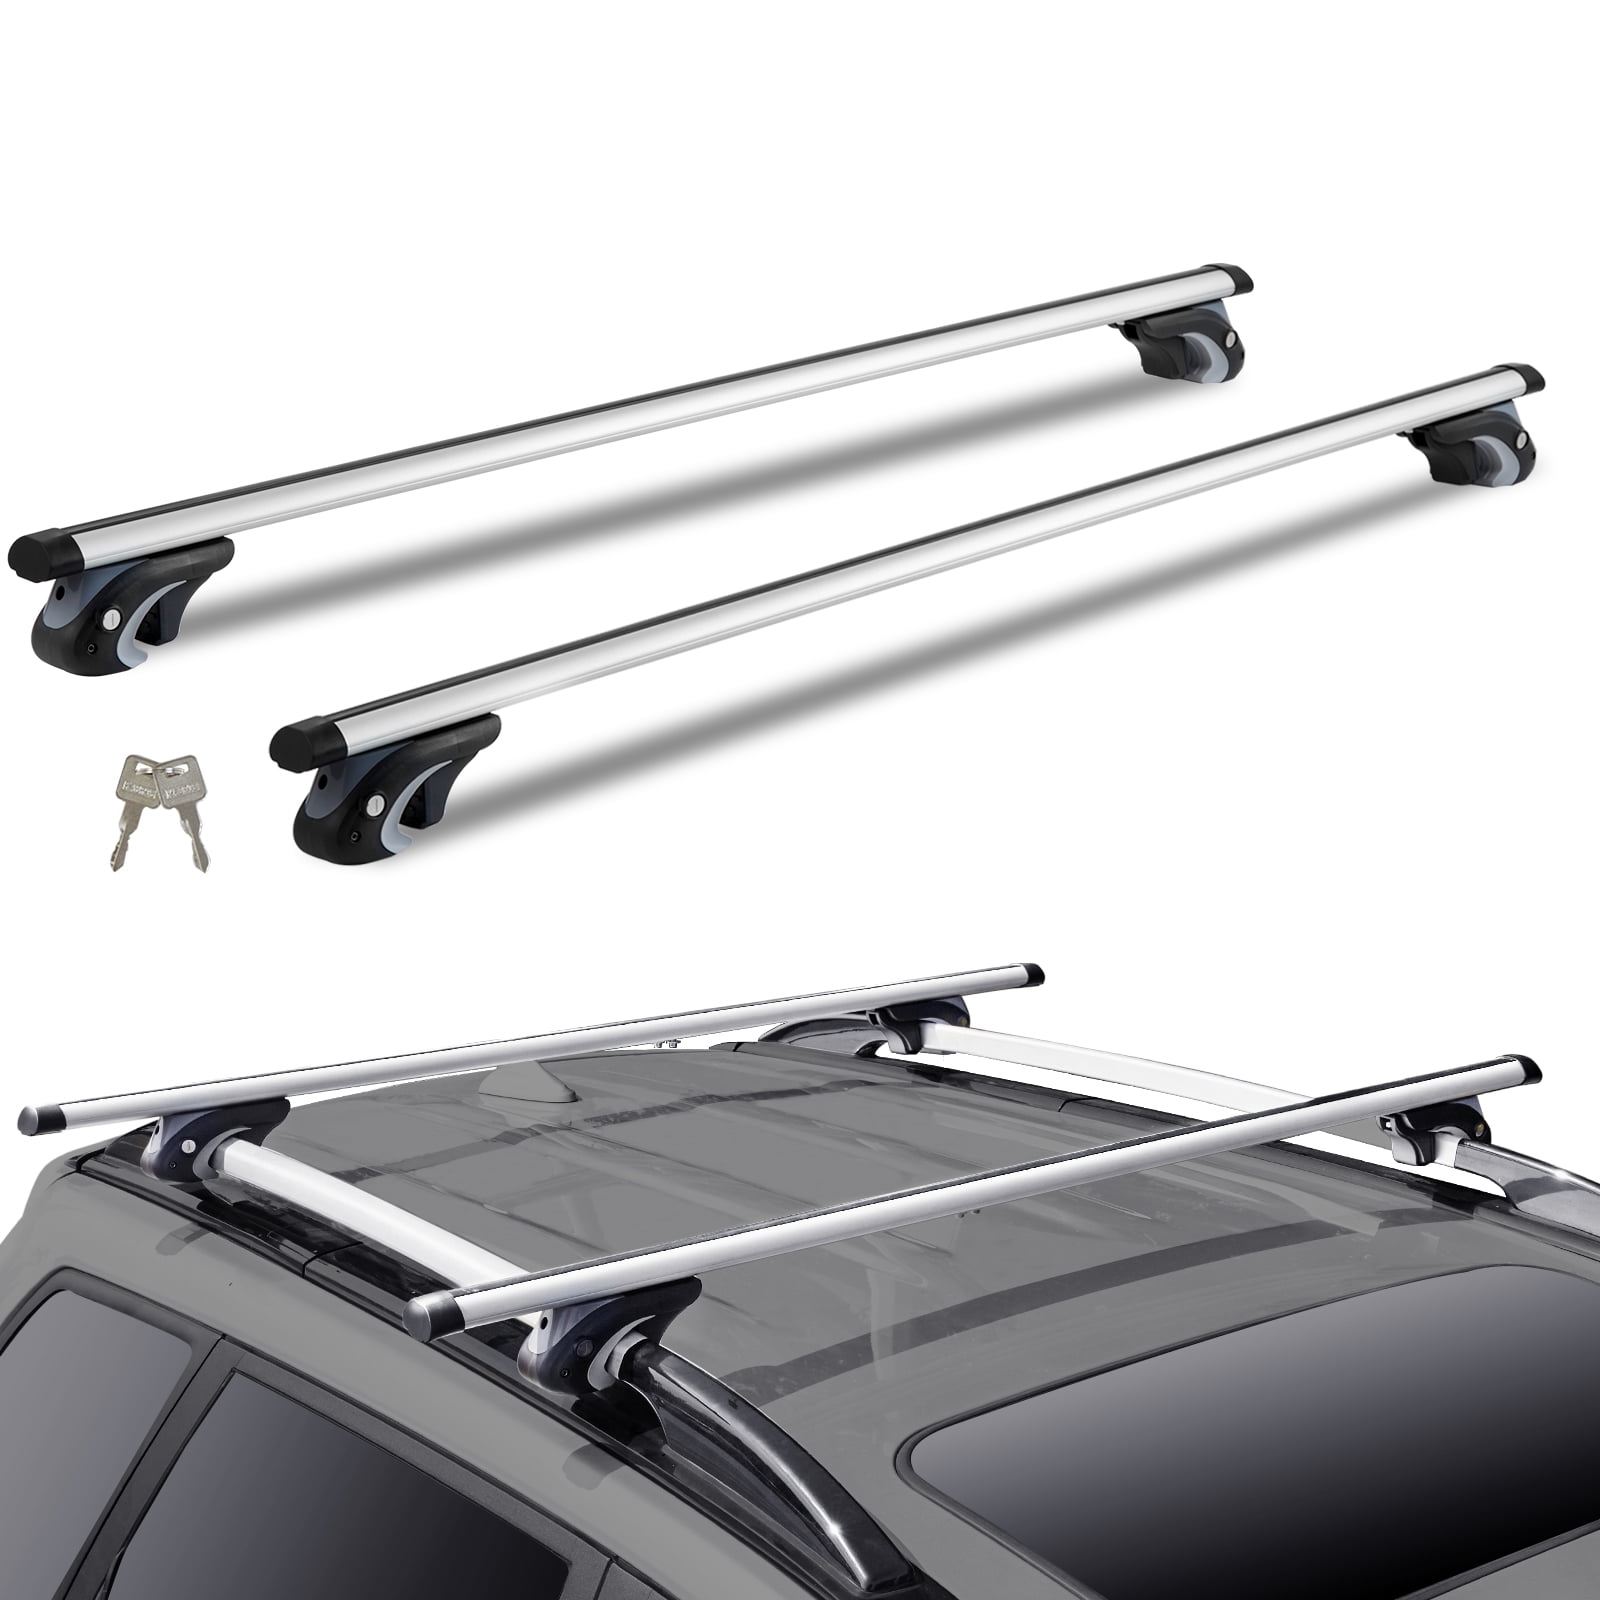 BMW Accessories For Sale  Mats Roof Racks & More in Madison WI